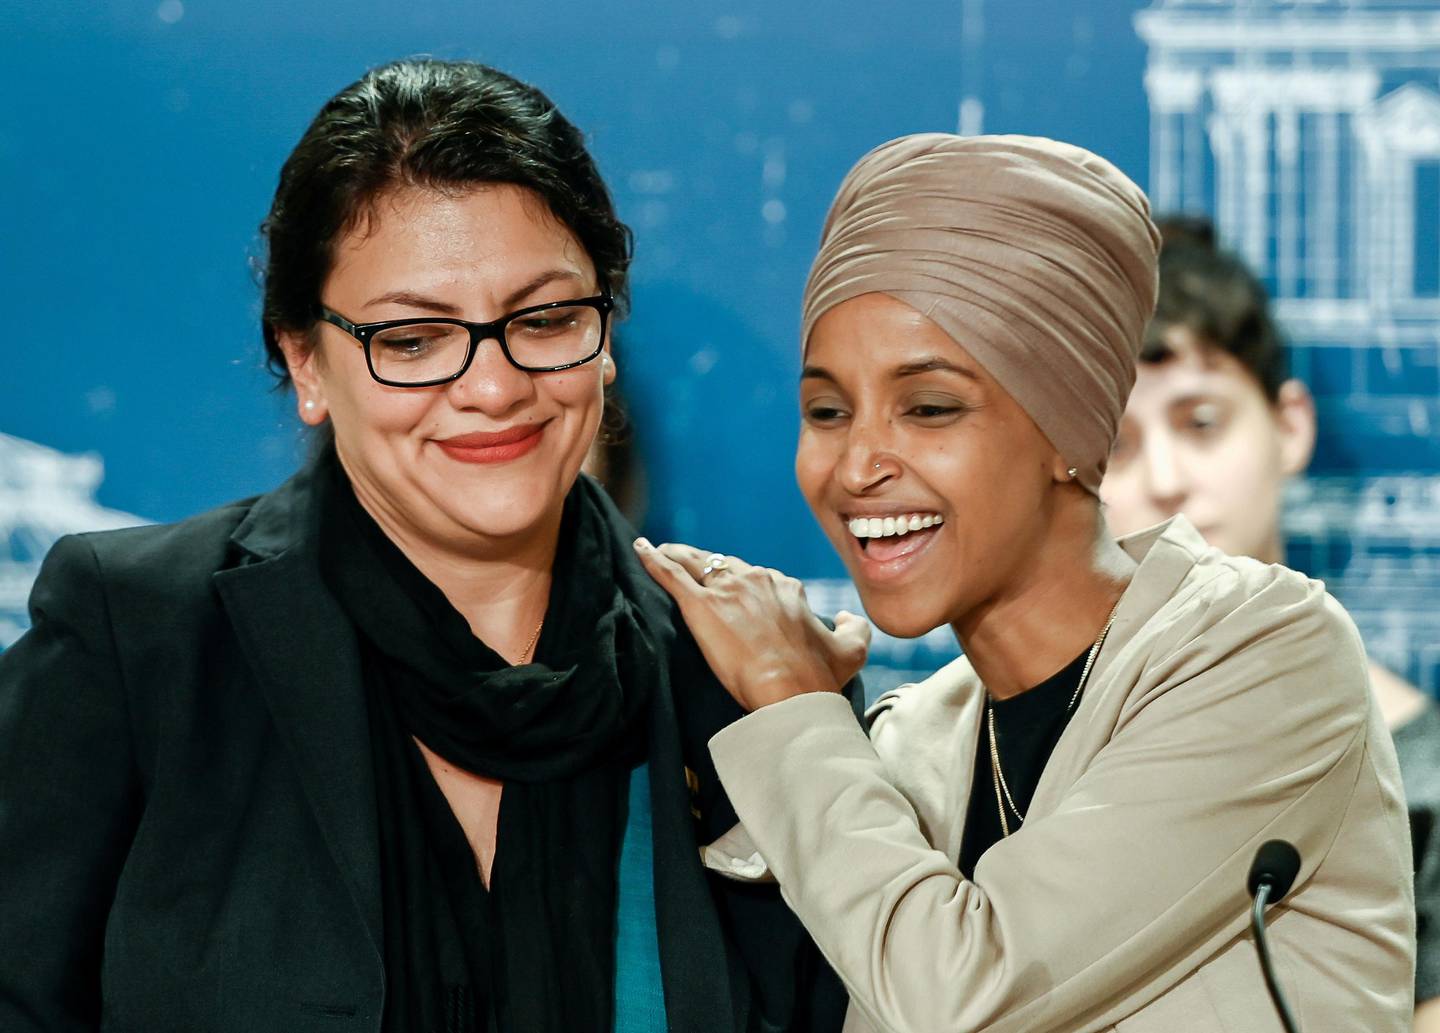 U.S. Representatives Rashida Tlaib (D-MI) and Ilhan Omar (D-MN) react as they discuss travel restrictions to Palestine and Israel during a news conference at the Minnesota State Capitol Building in St Paul, Minnesota, August 19, 2019.    REUTERS/Caroline Yang     TPX IMAGES OF THE DAY